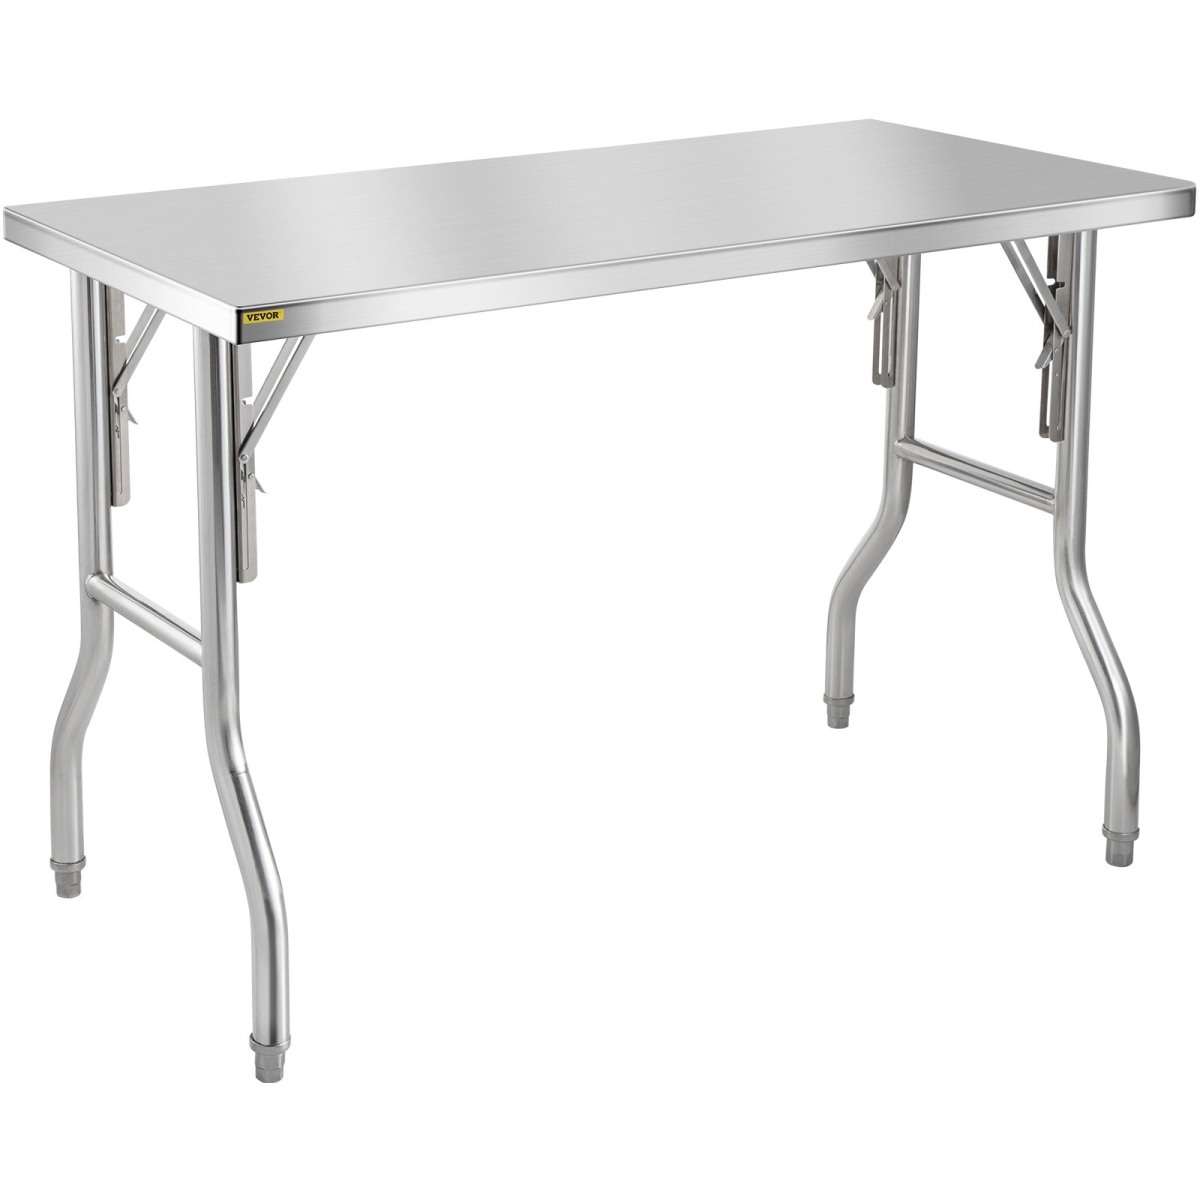 Picture of Vevor CFGZT24X48YC00001V0 48 x 24 in. Folding Commercial Prep Table